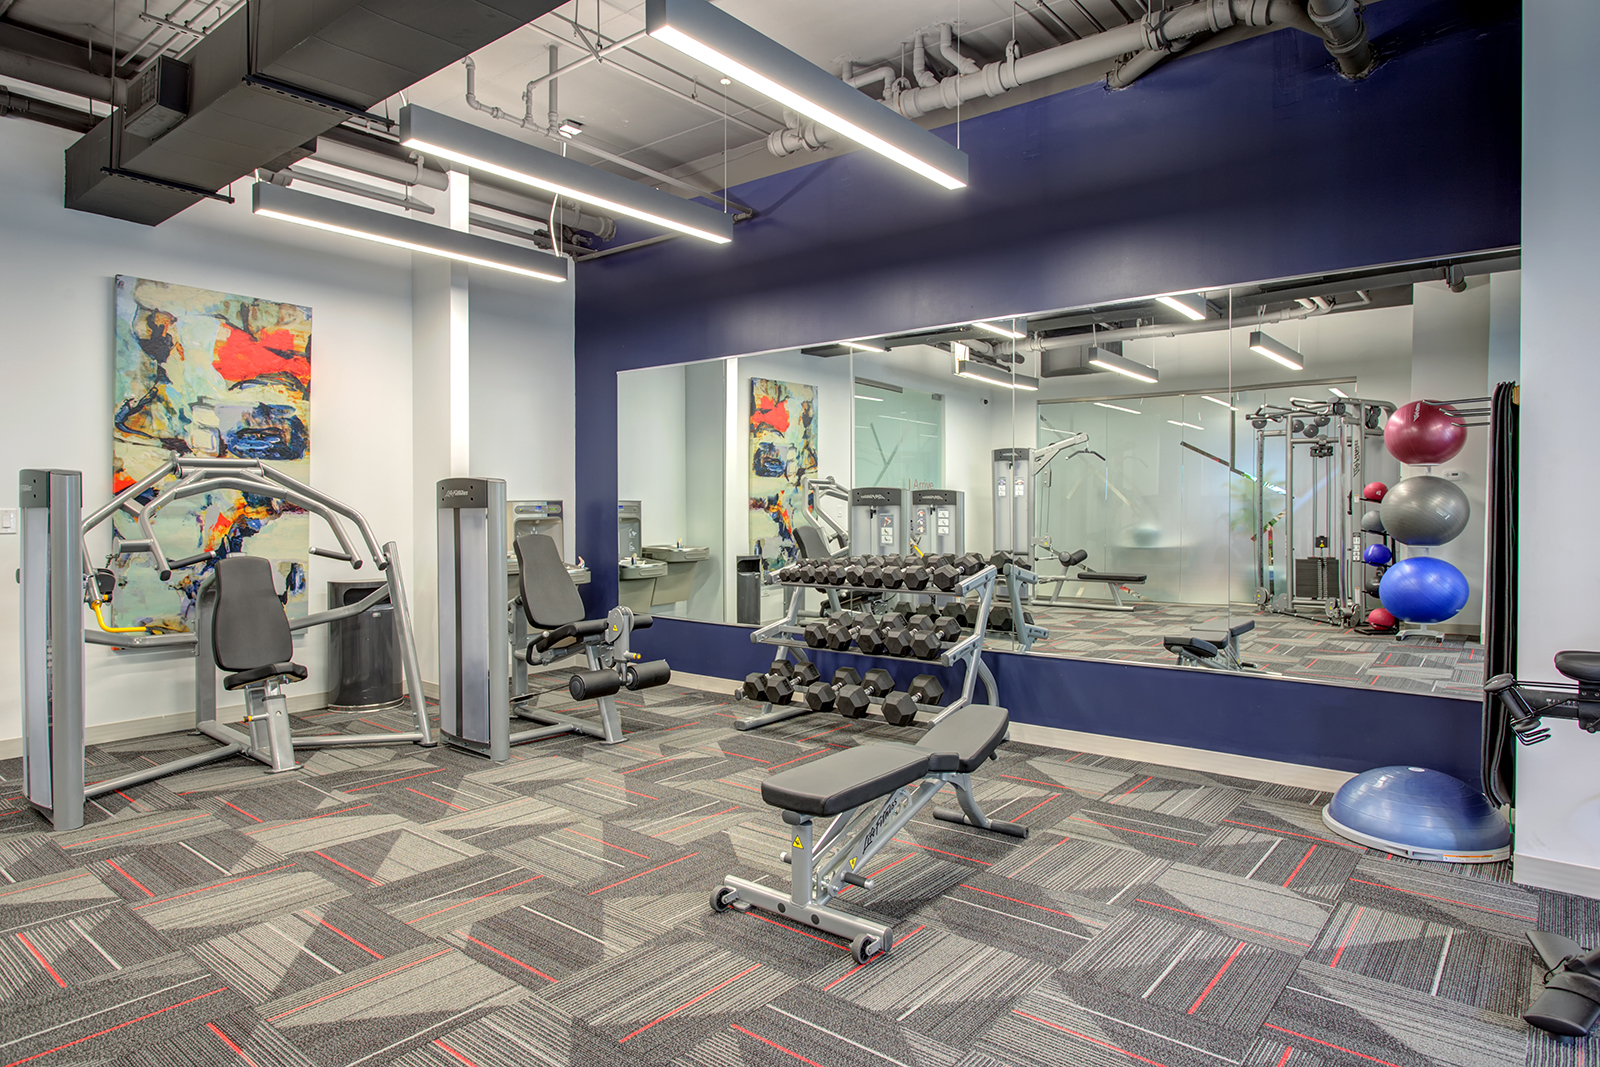 arrive-south-loop-apartments-for-rent-chicago-il-60616-fitness-center